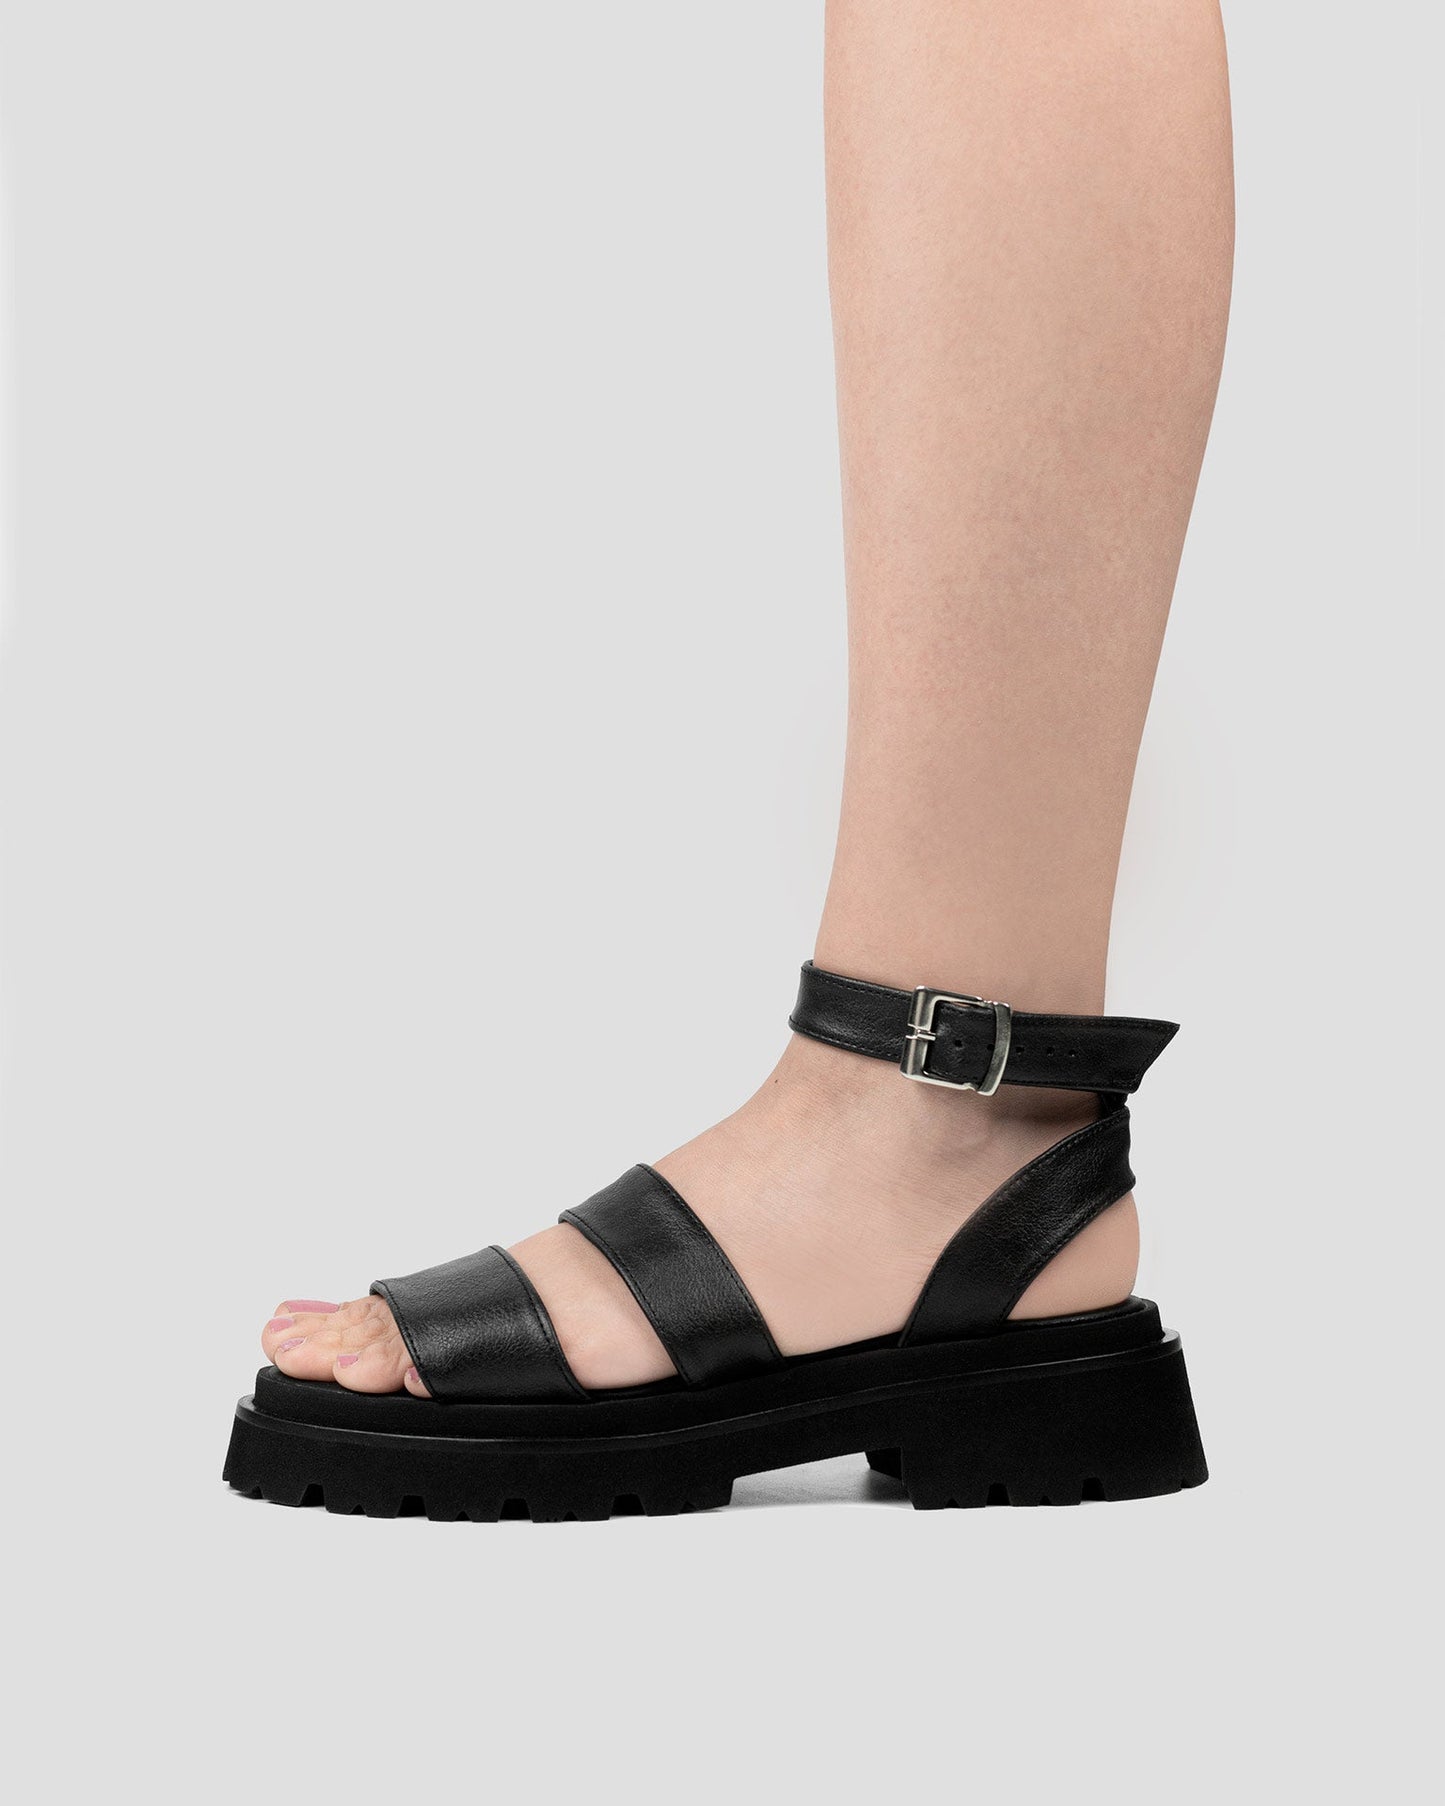 Strappy Sandals made of cactus leather Desserto® - sample sale